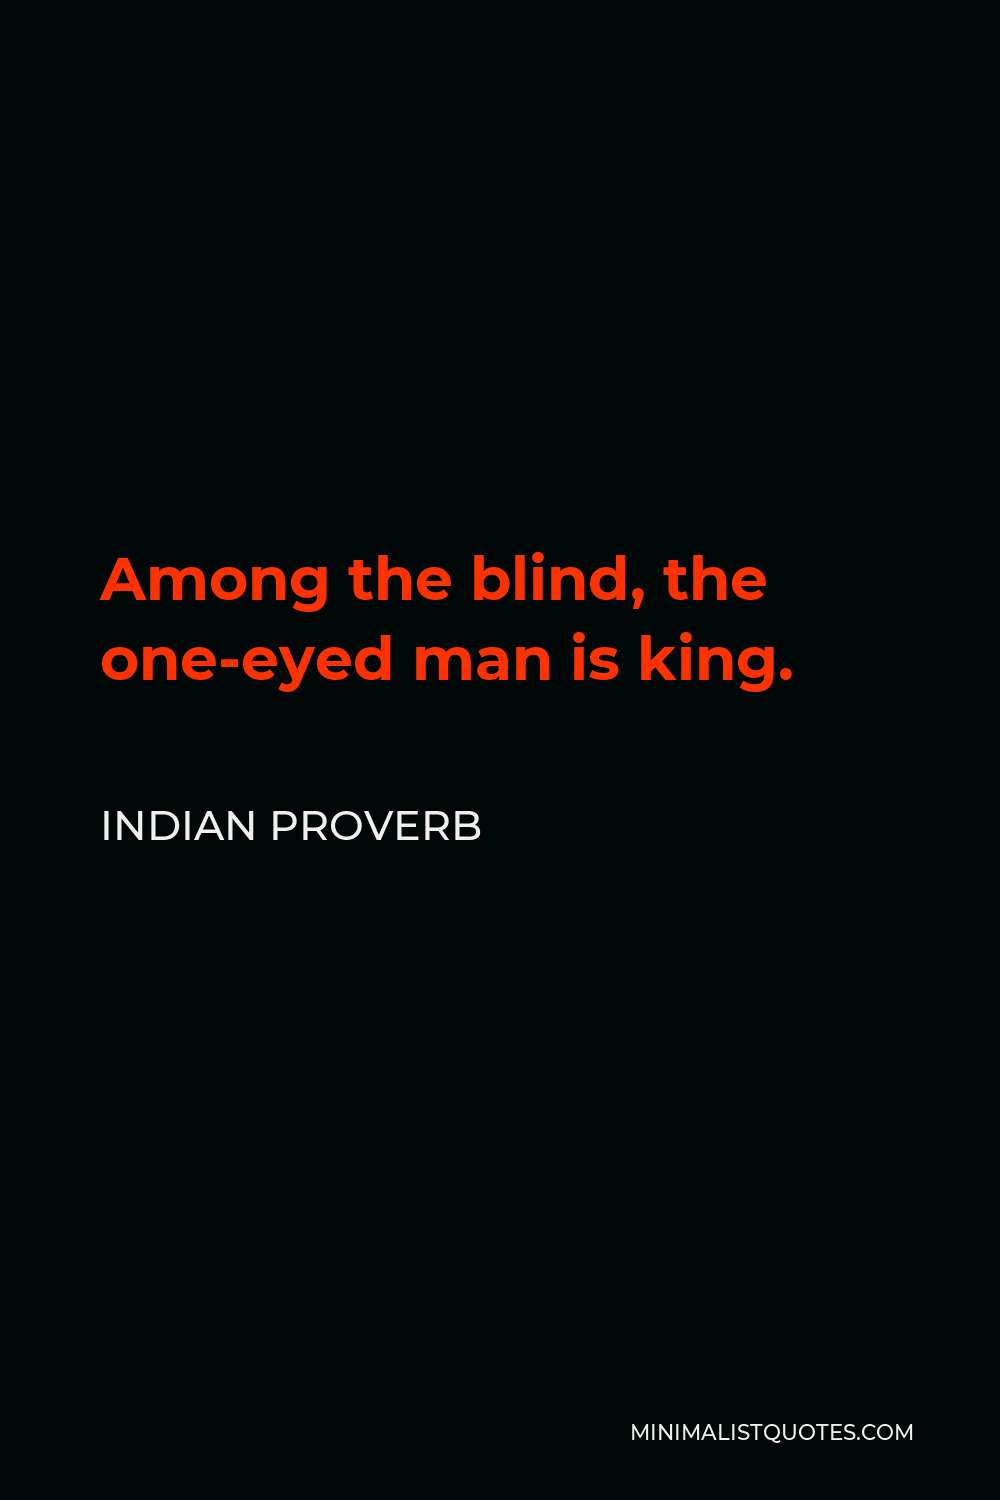 Indian Proverb Quote - Among the blind, the one-eyed man is king.